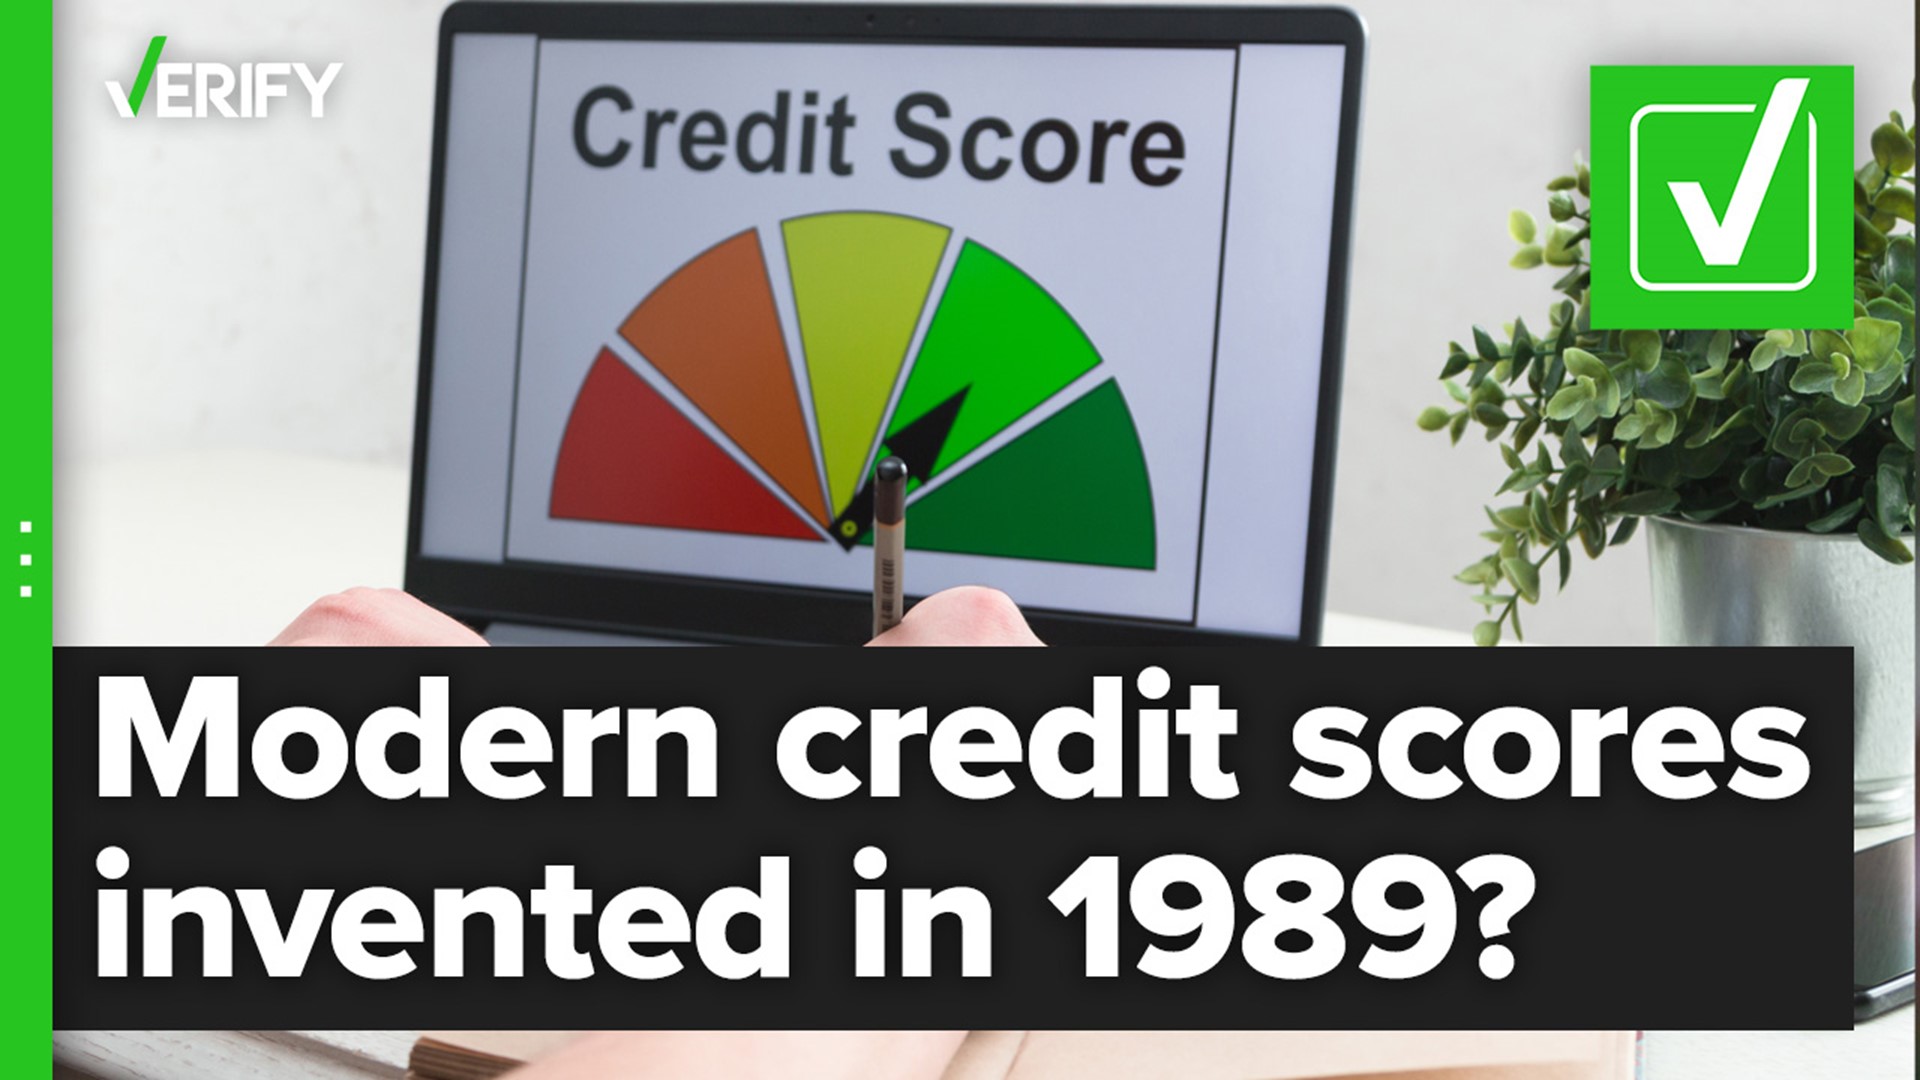 Although FICO’s first universal credit score was invented in 1989, credit reporting and industry-specific credit scores existed long before.